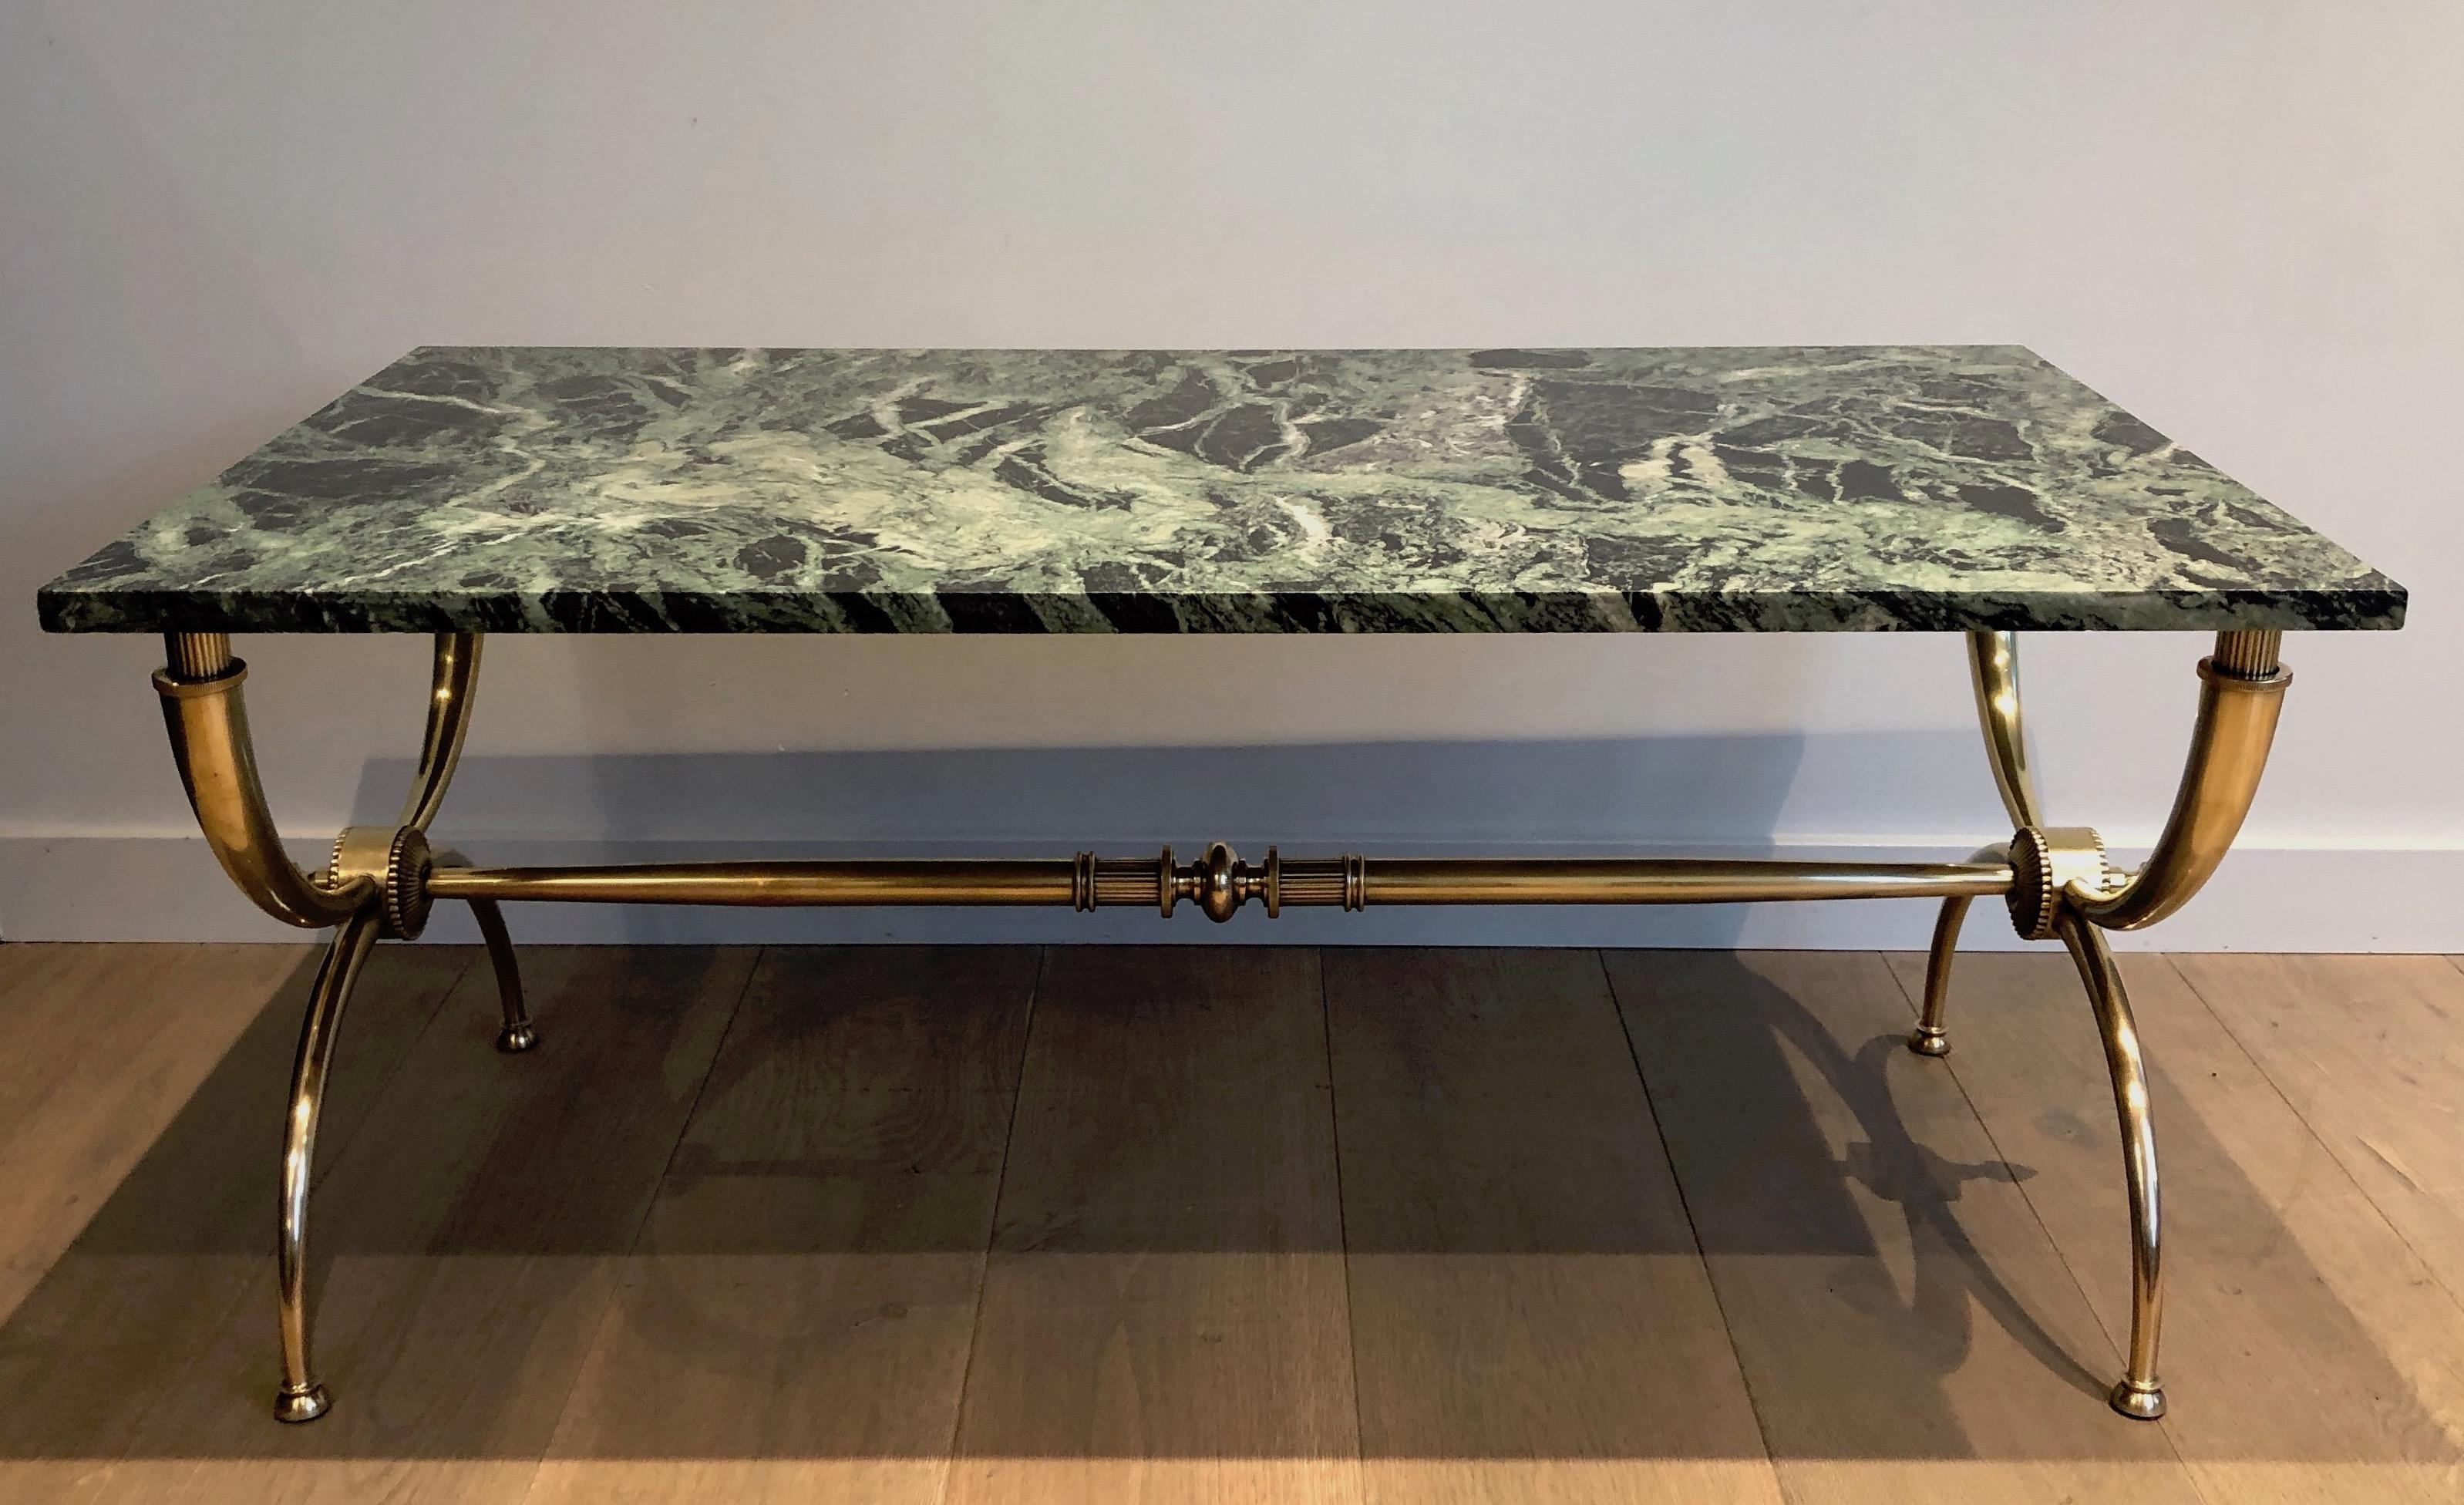 Raymond Subes brass coffee table with green marble top. French work. By Raymond Subes. Circa 1940.